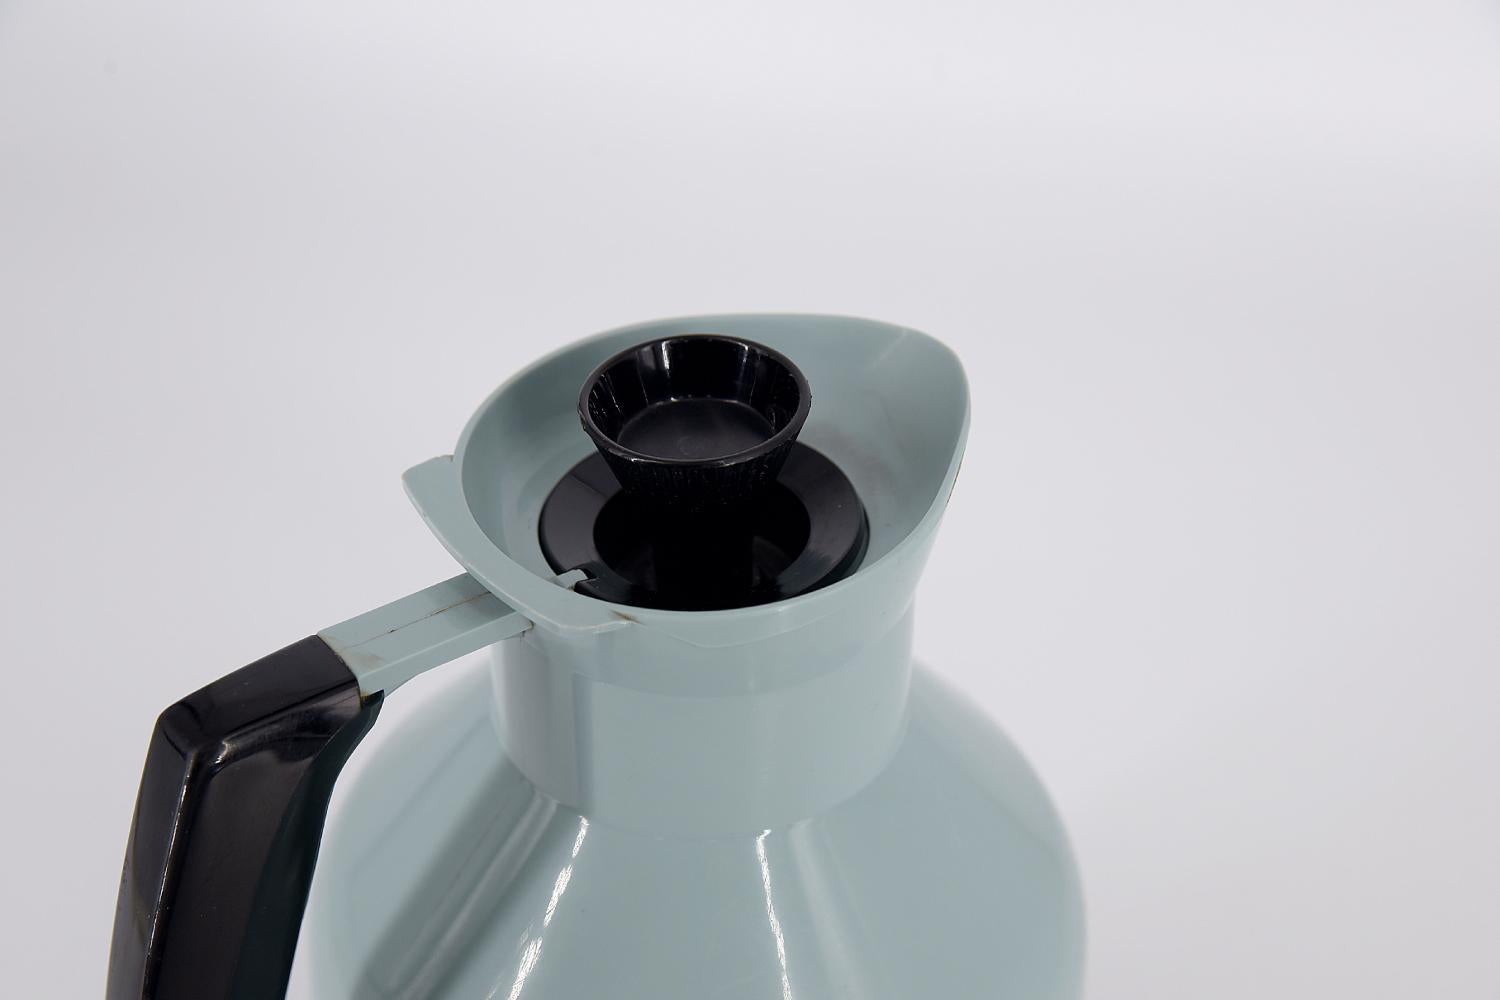 This thermal jug was designed by G. Rosendahl for the Swedish Falkenberg manufacture during the 1960s. Thermos flask made of blue and black plastic. The handle, lid and bottom are black. The cork is designed in which the rubber expands and contracts